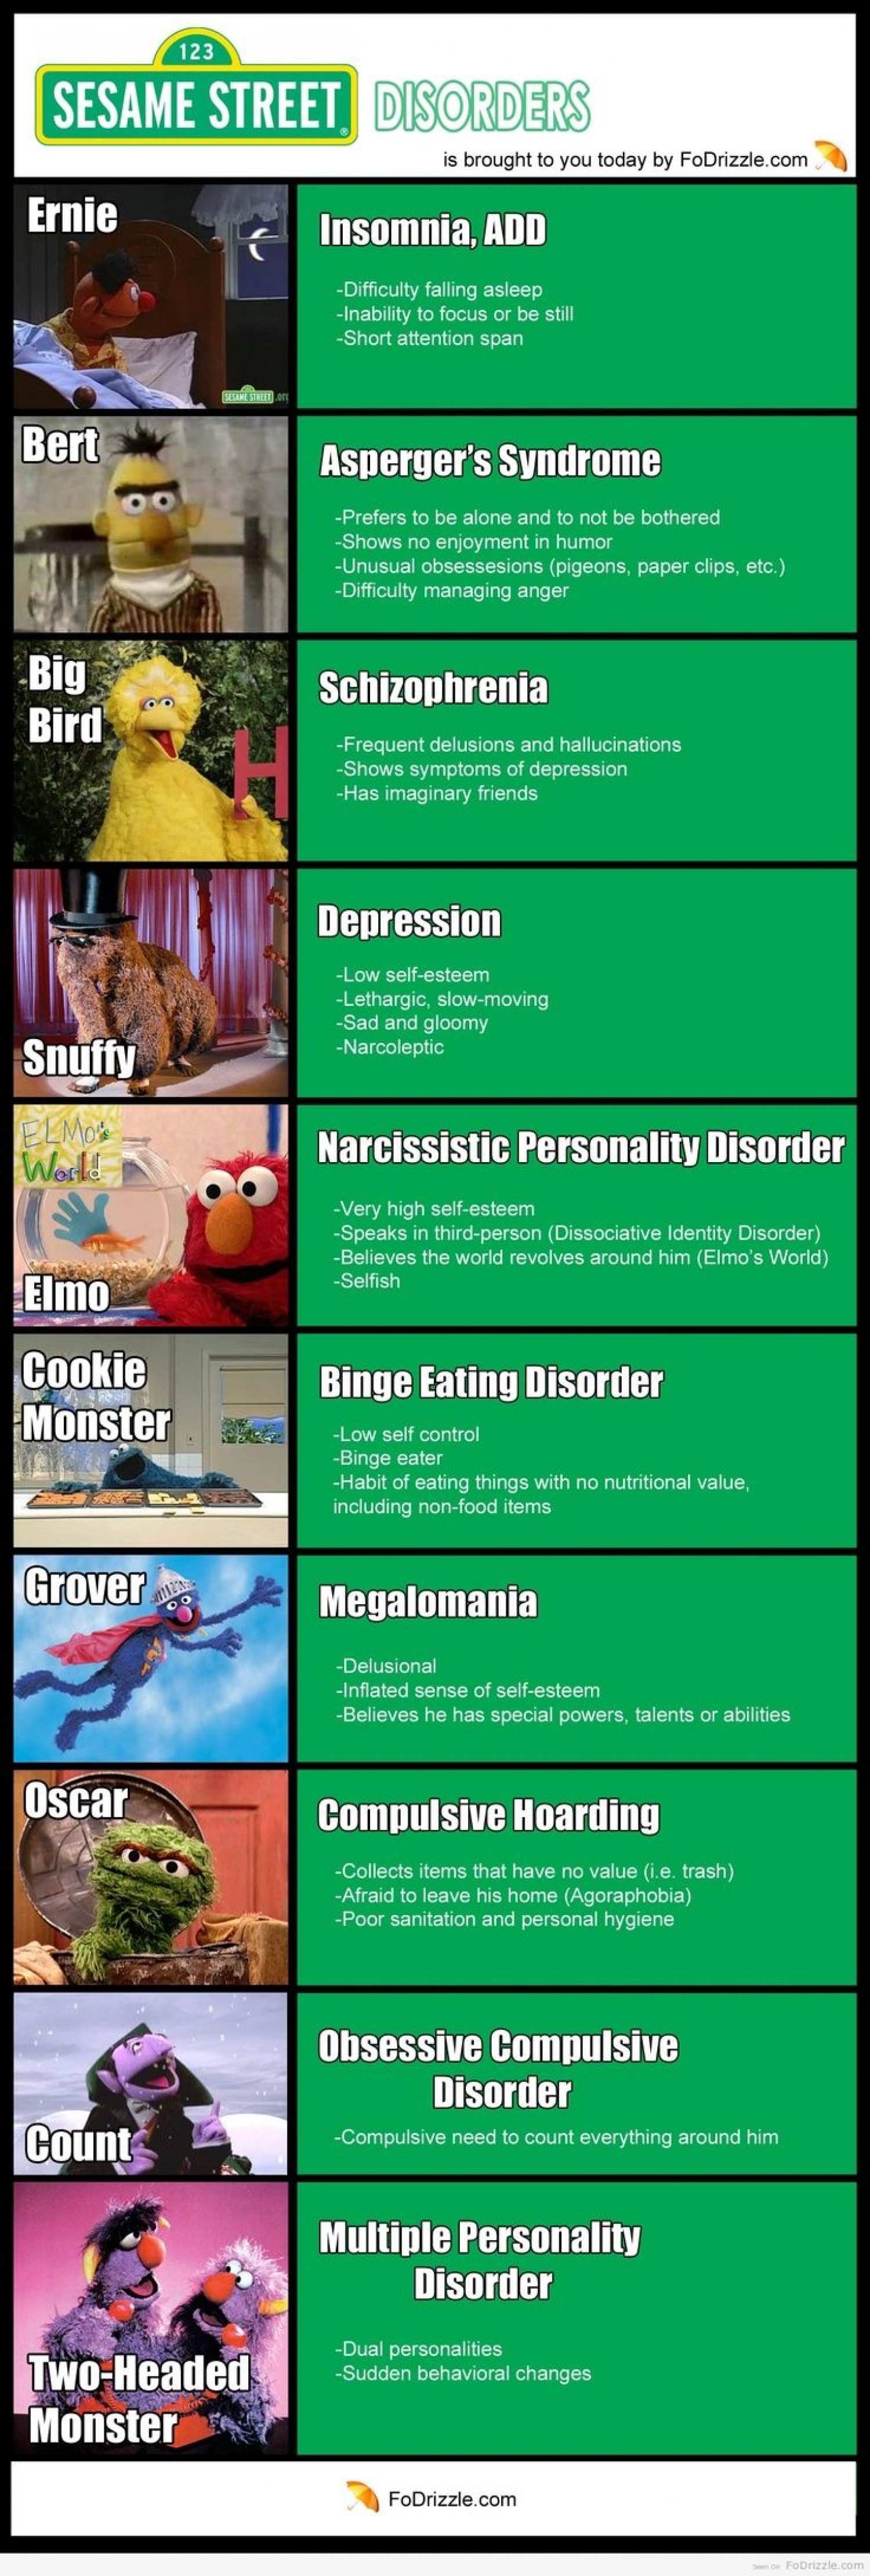 psychological-disorders-sesame-street-infographic